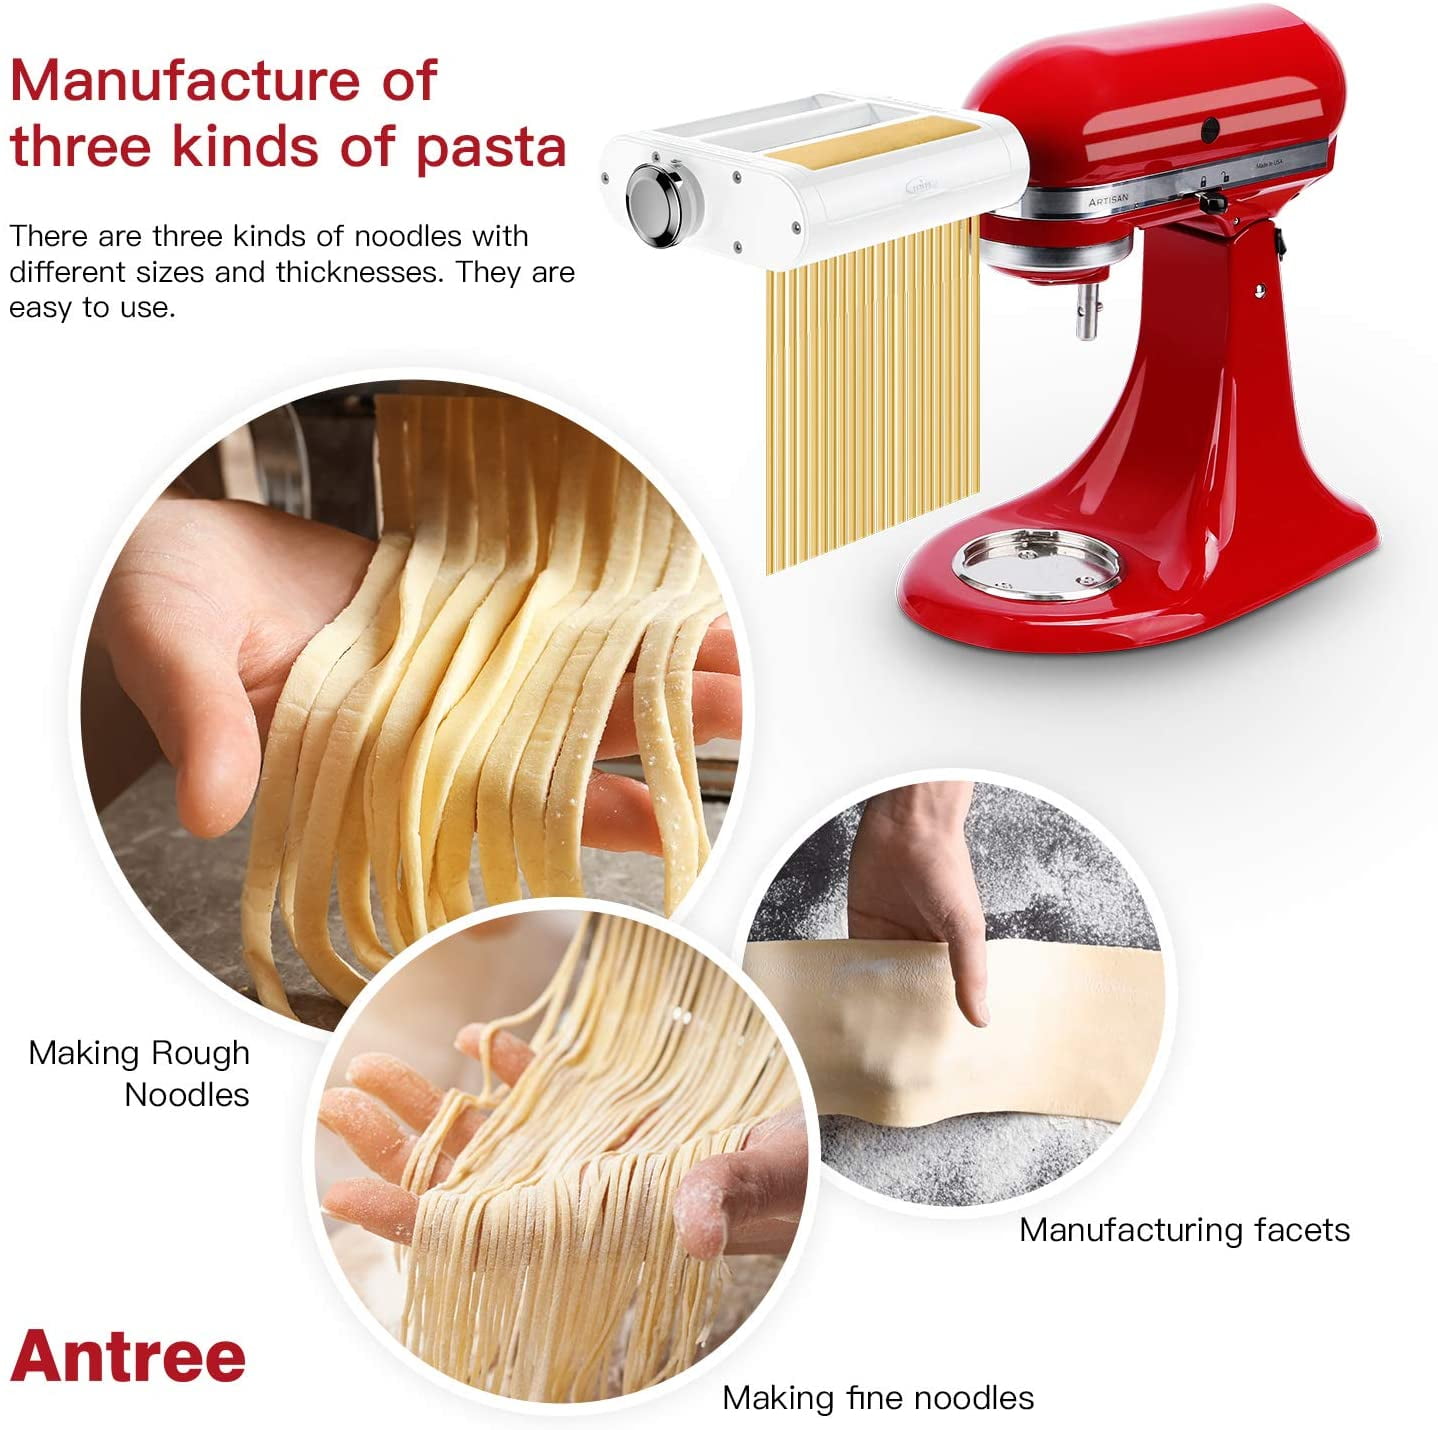 ANTREE Pasta Maker Attachment for KitchenAid Stand Mixers with Pasta Drying  Rack & Cleaning Brush, 3-1 Set includes Pasta Sheet Roller, Spaghetti